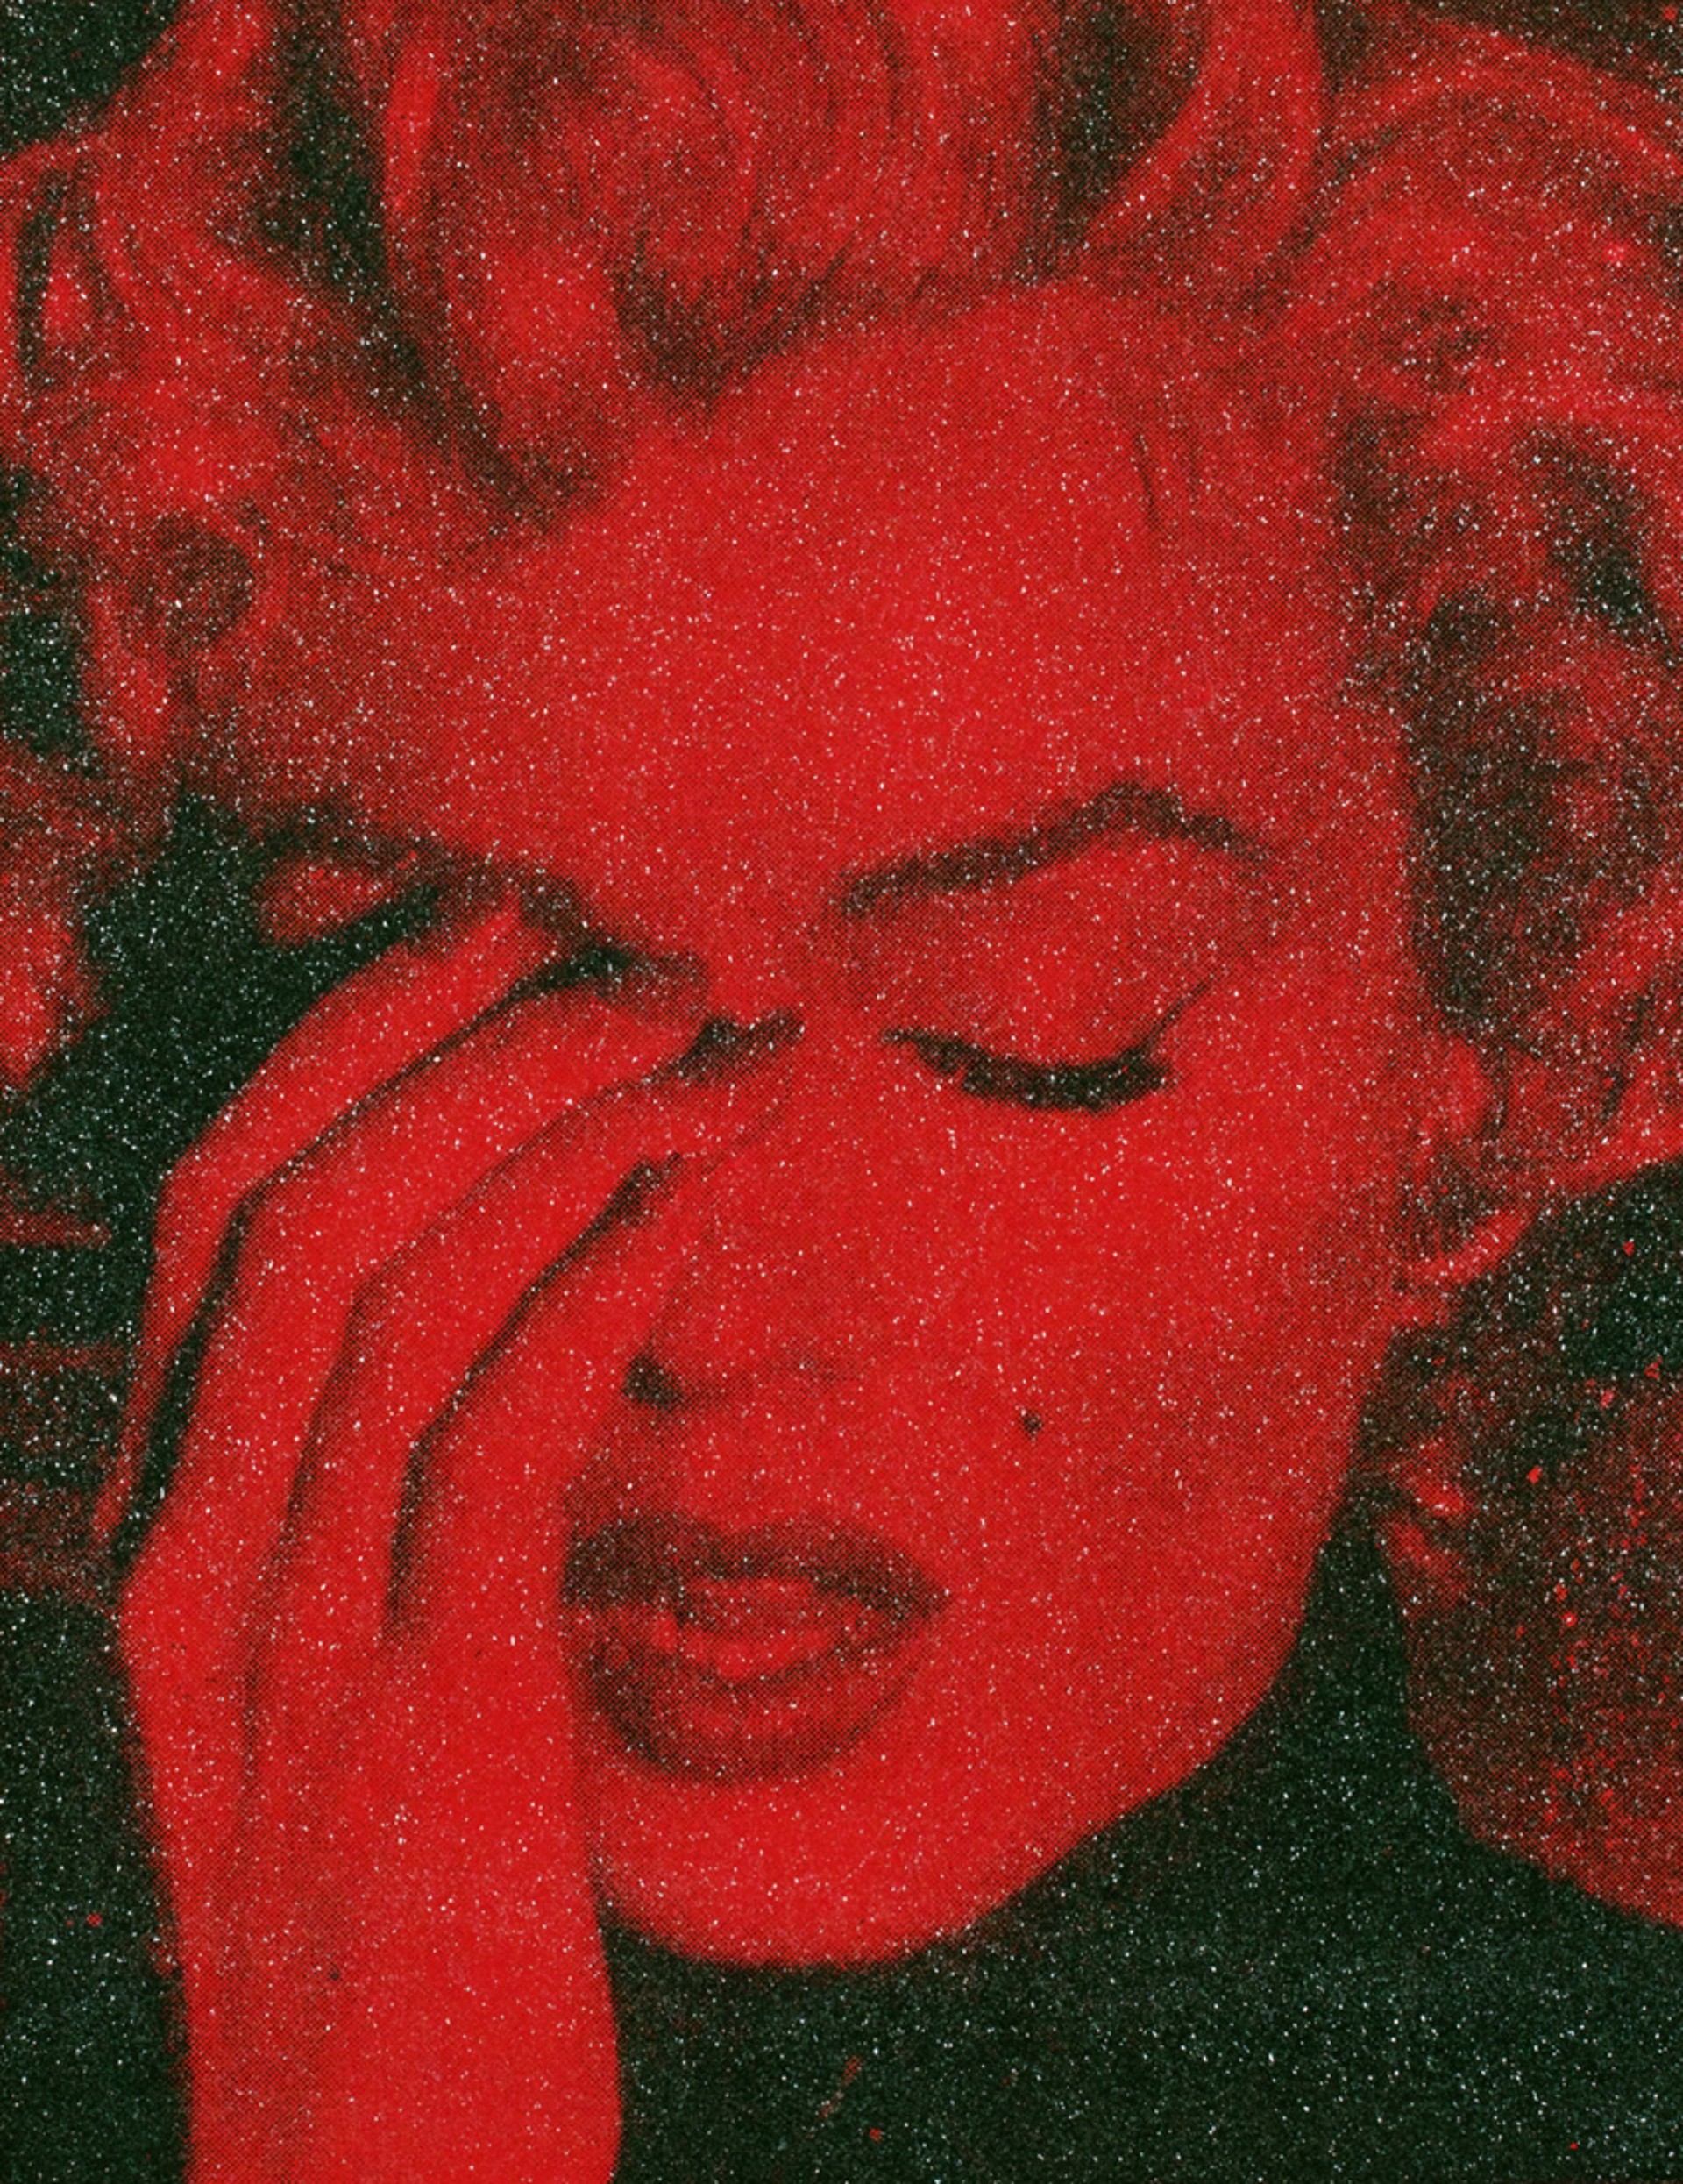 MARILYN CRYING CALIFORNIA - Blind Red-Edition 3/4 by THE WHITE ROOM GALLERY